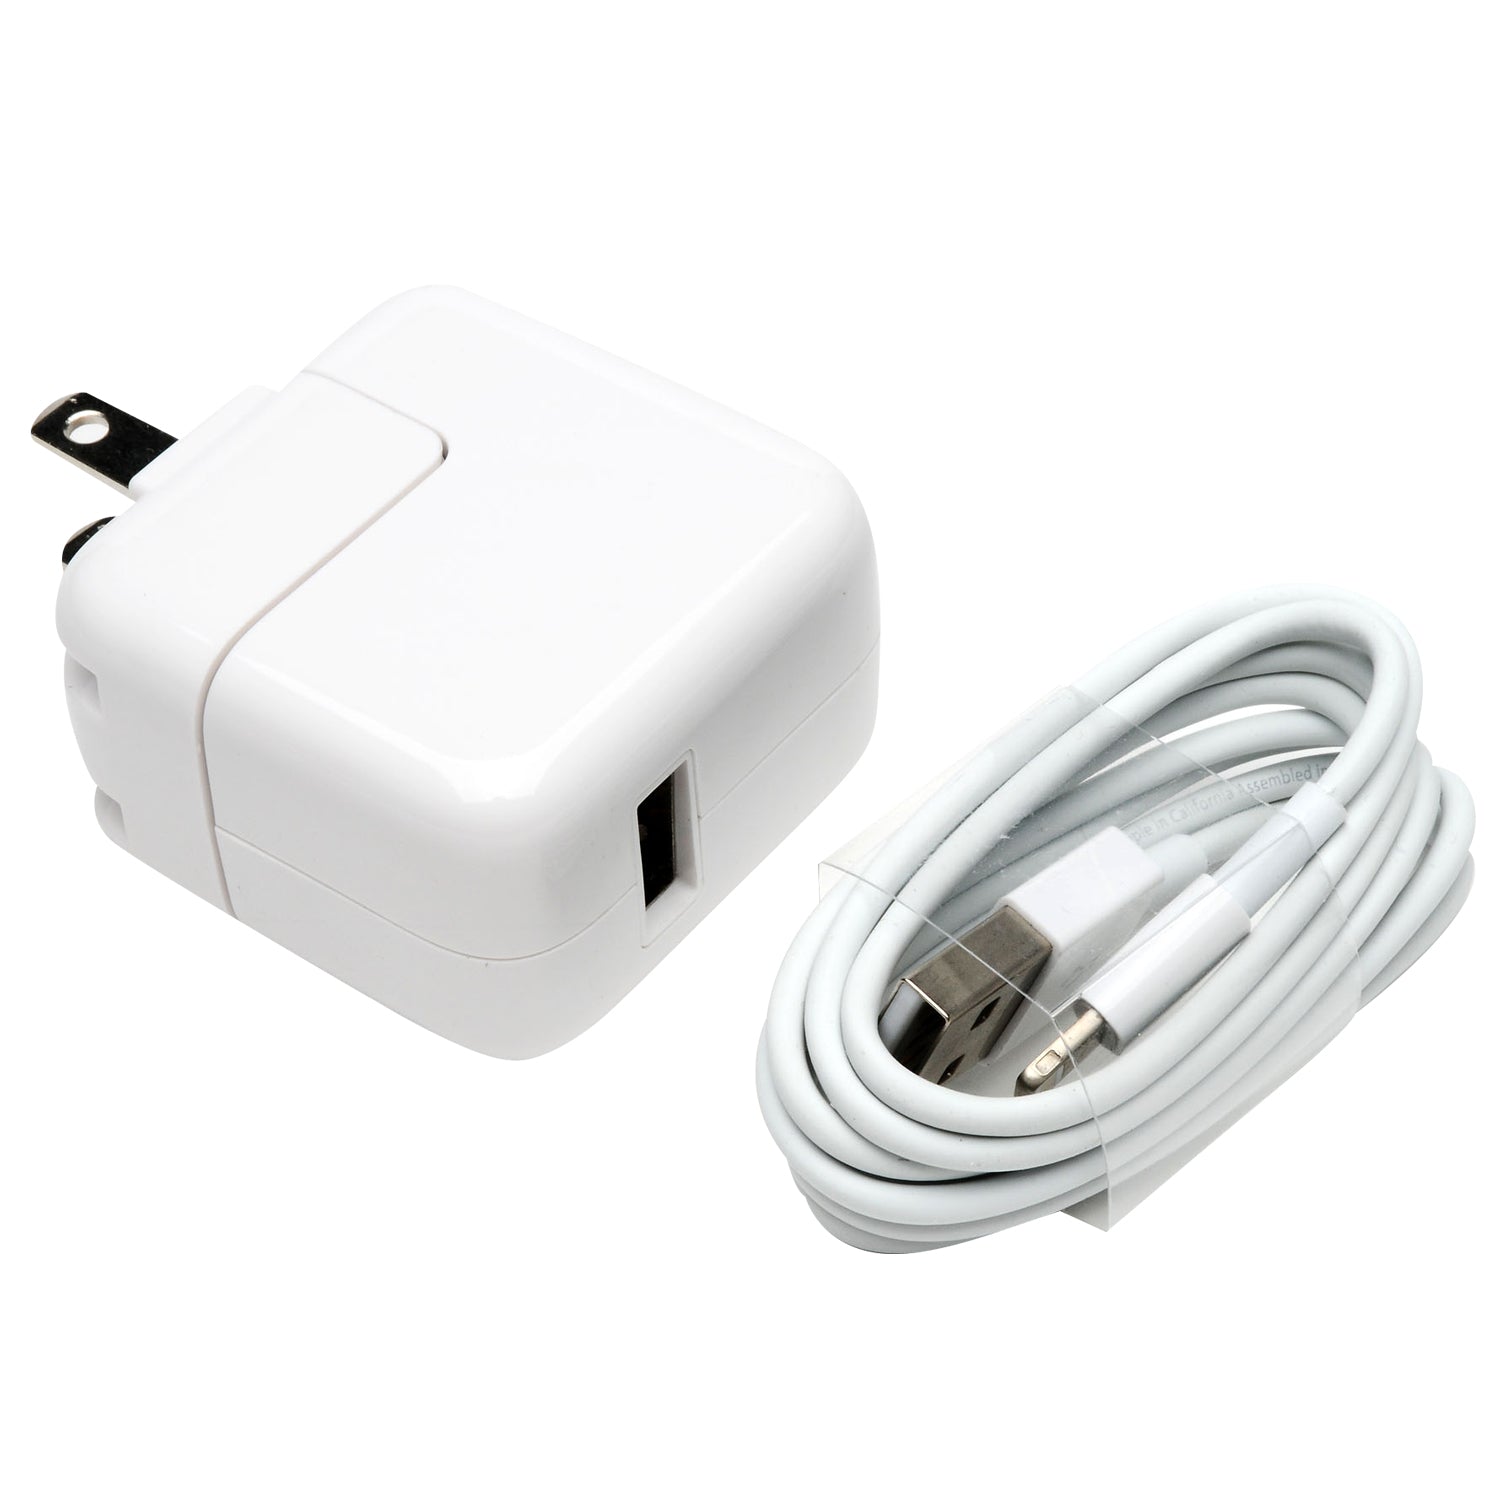 6-AC2N1-9 2N1 Adapter W/Cable 2A 5V iPad